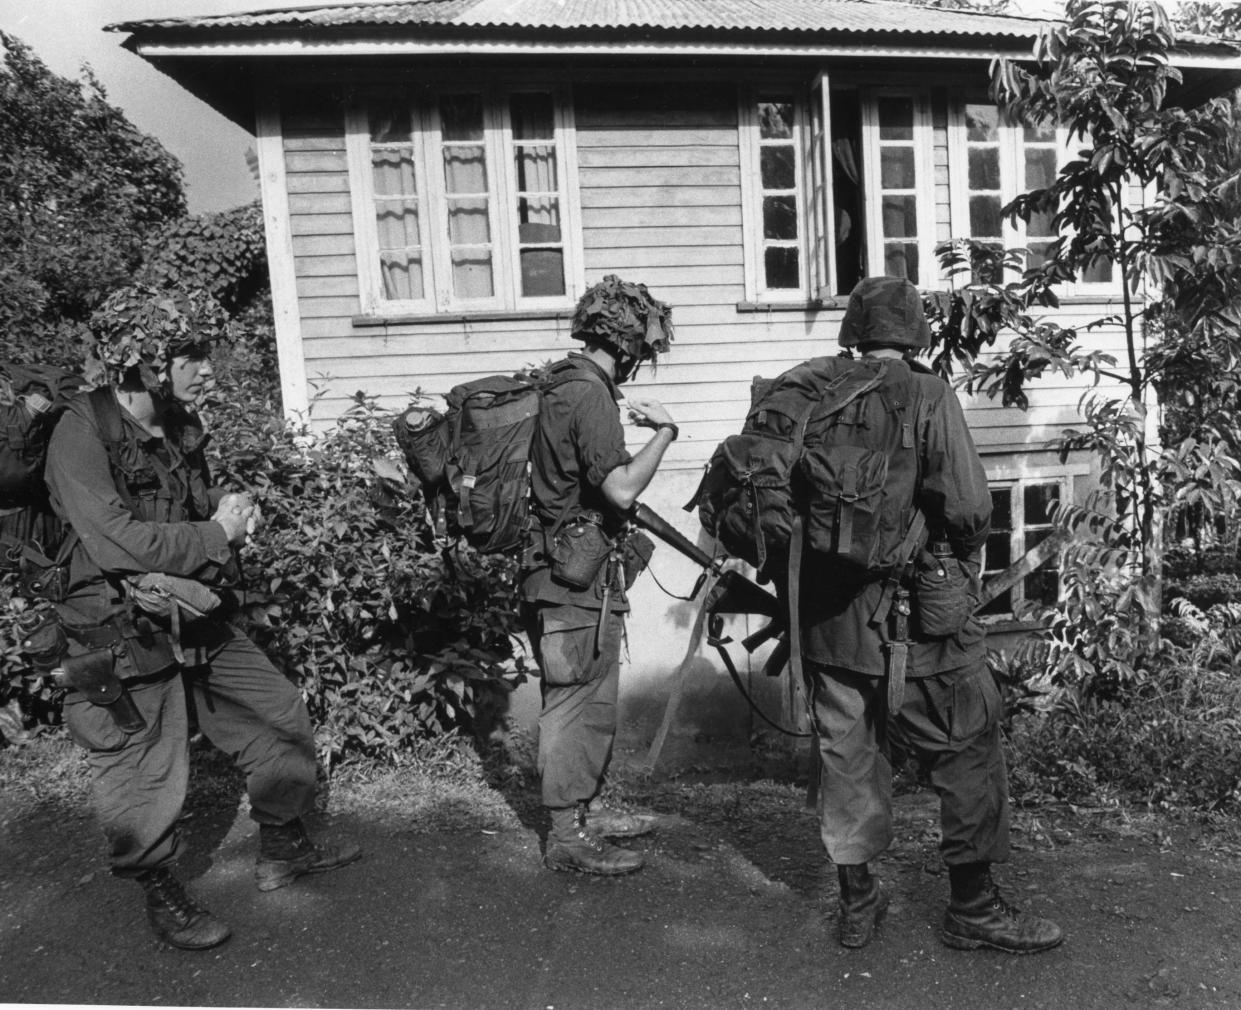 Troops with B Company, 2nd Battalion, 505th Parachute Infantry Regiment check a house near Pearls Airport in Grenada in November 1983.